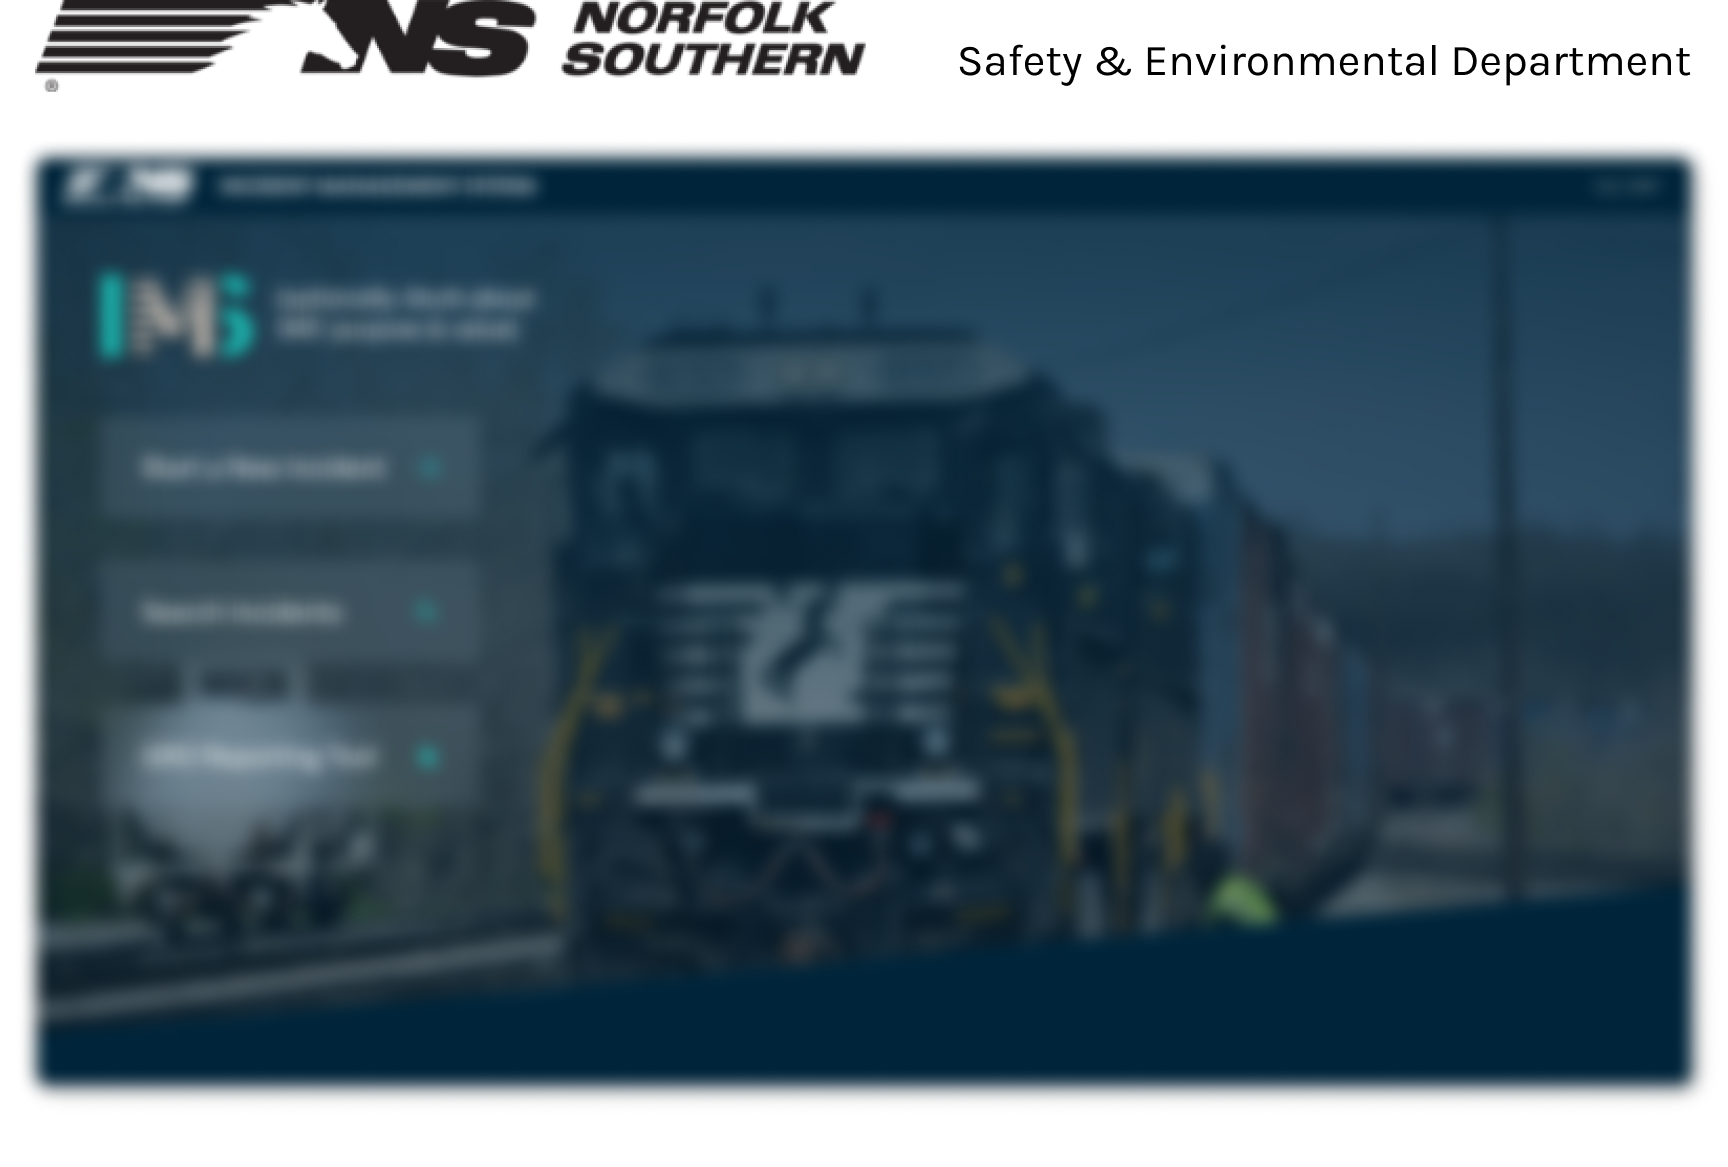 Norfolk Southern internship cover image, with the Norfolk Southern logo and a blurred image of the design Evie worked on